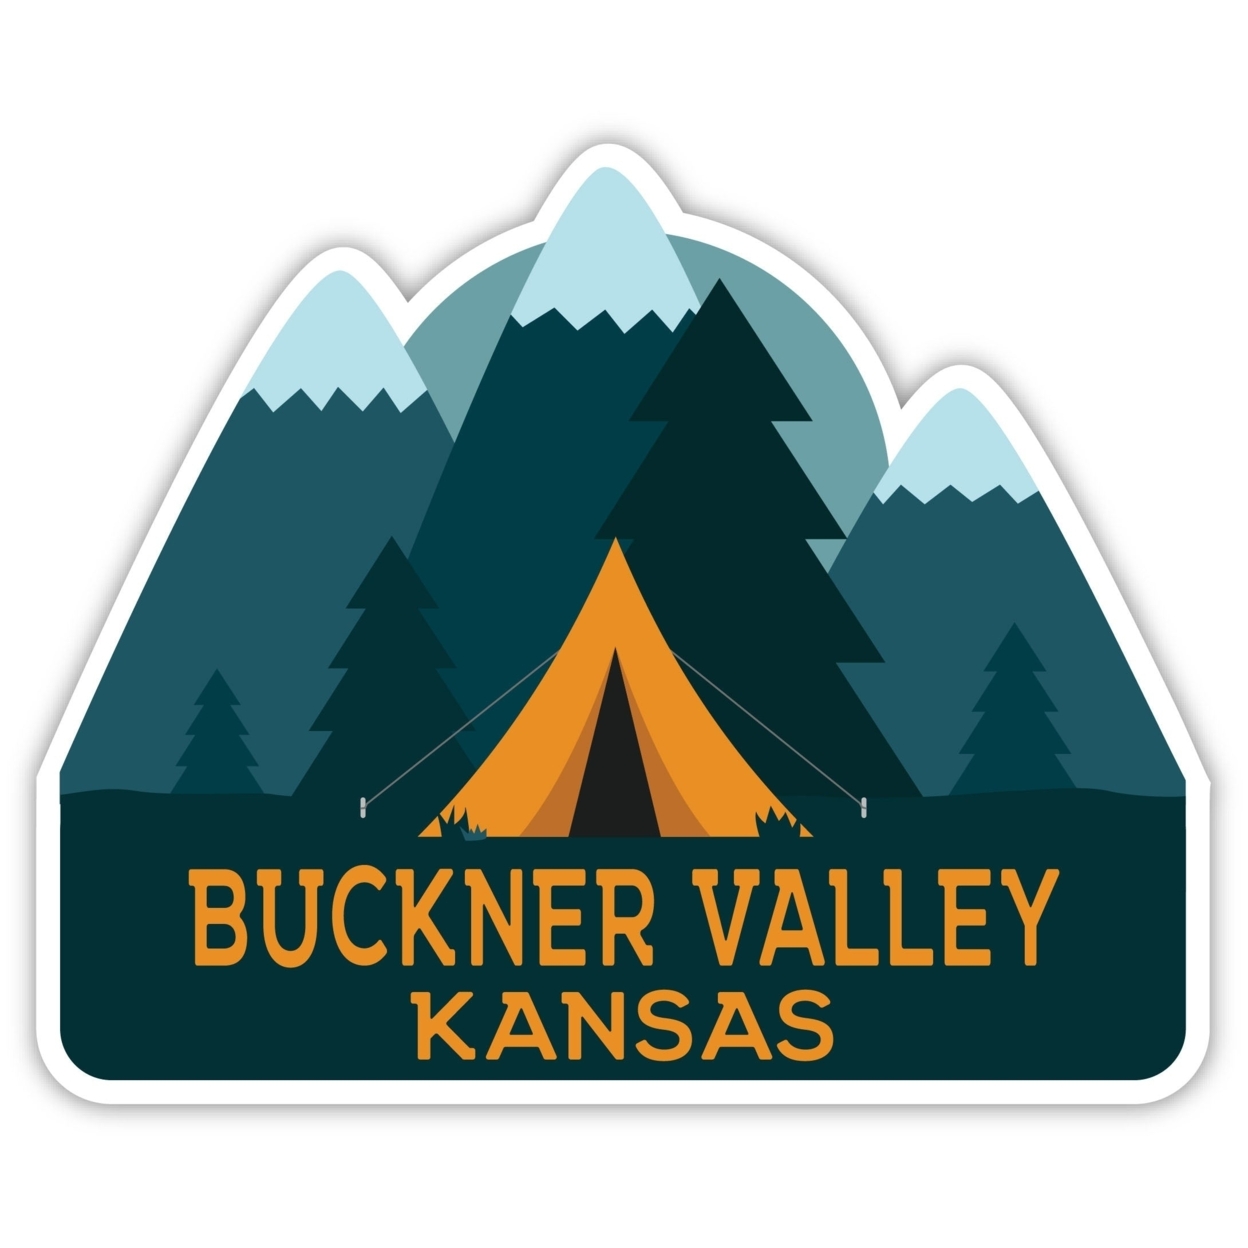 Buckner Valley Kansas Souvenir Decorative Stickers (Choose Theme And Size) - 4-Pack, 12-Inch, Tent